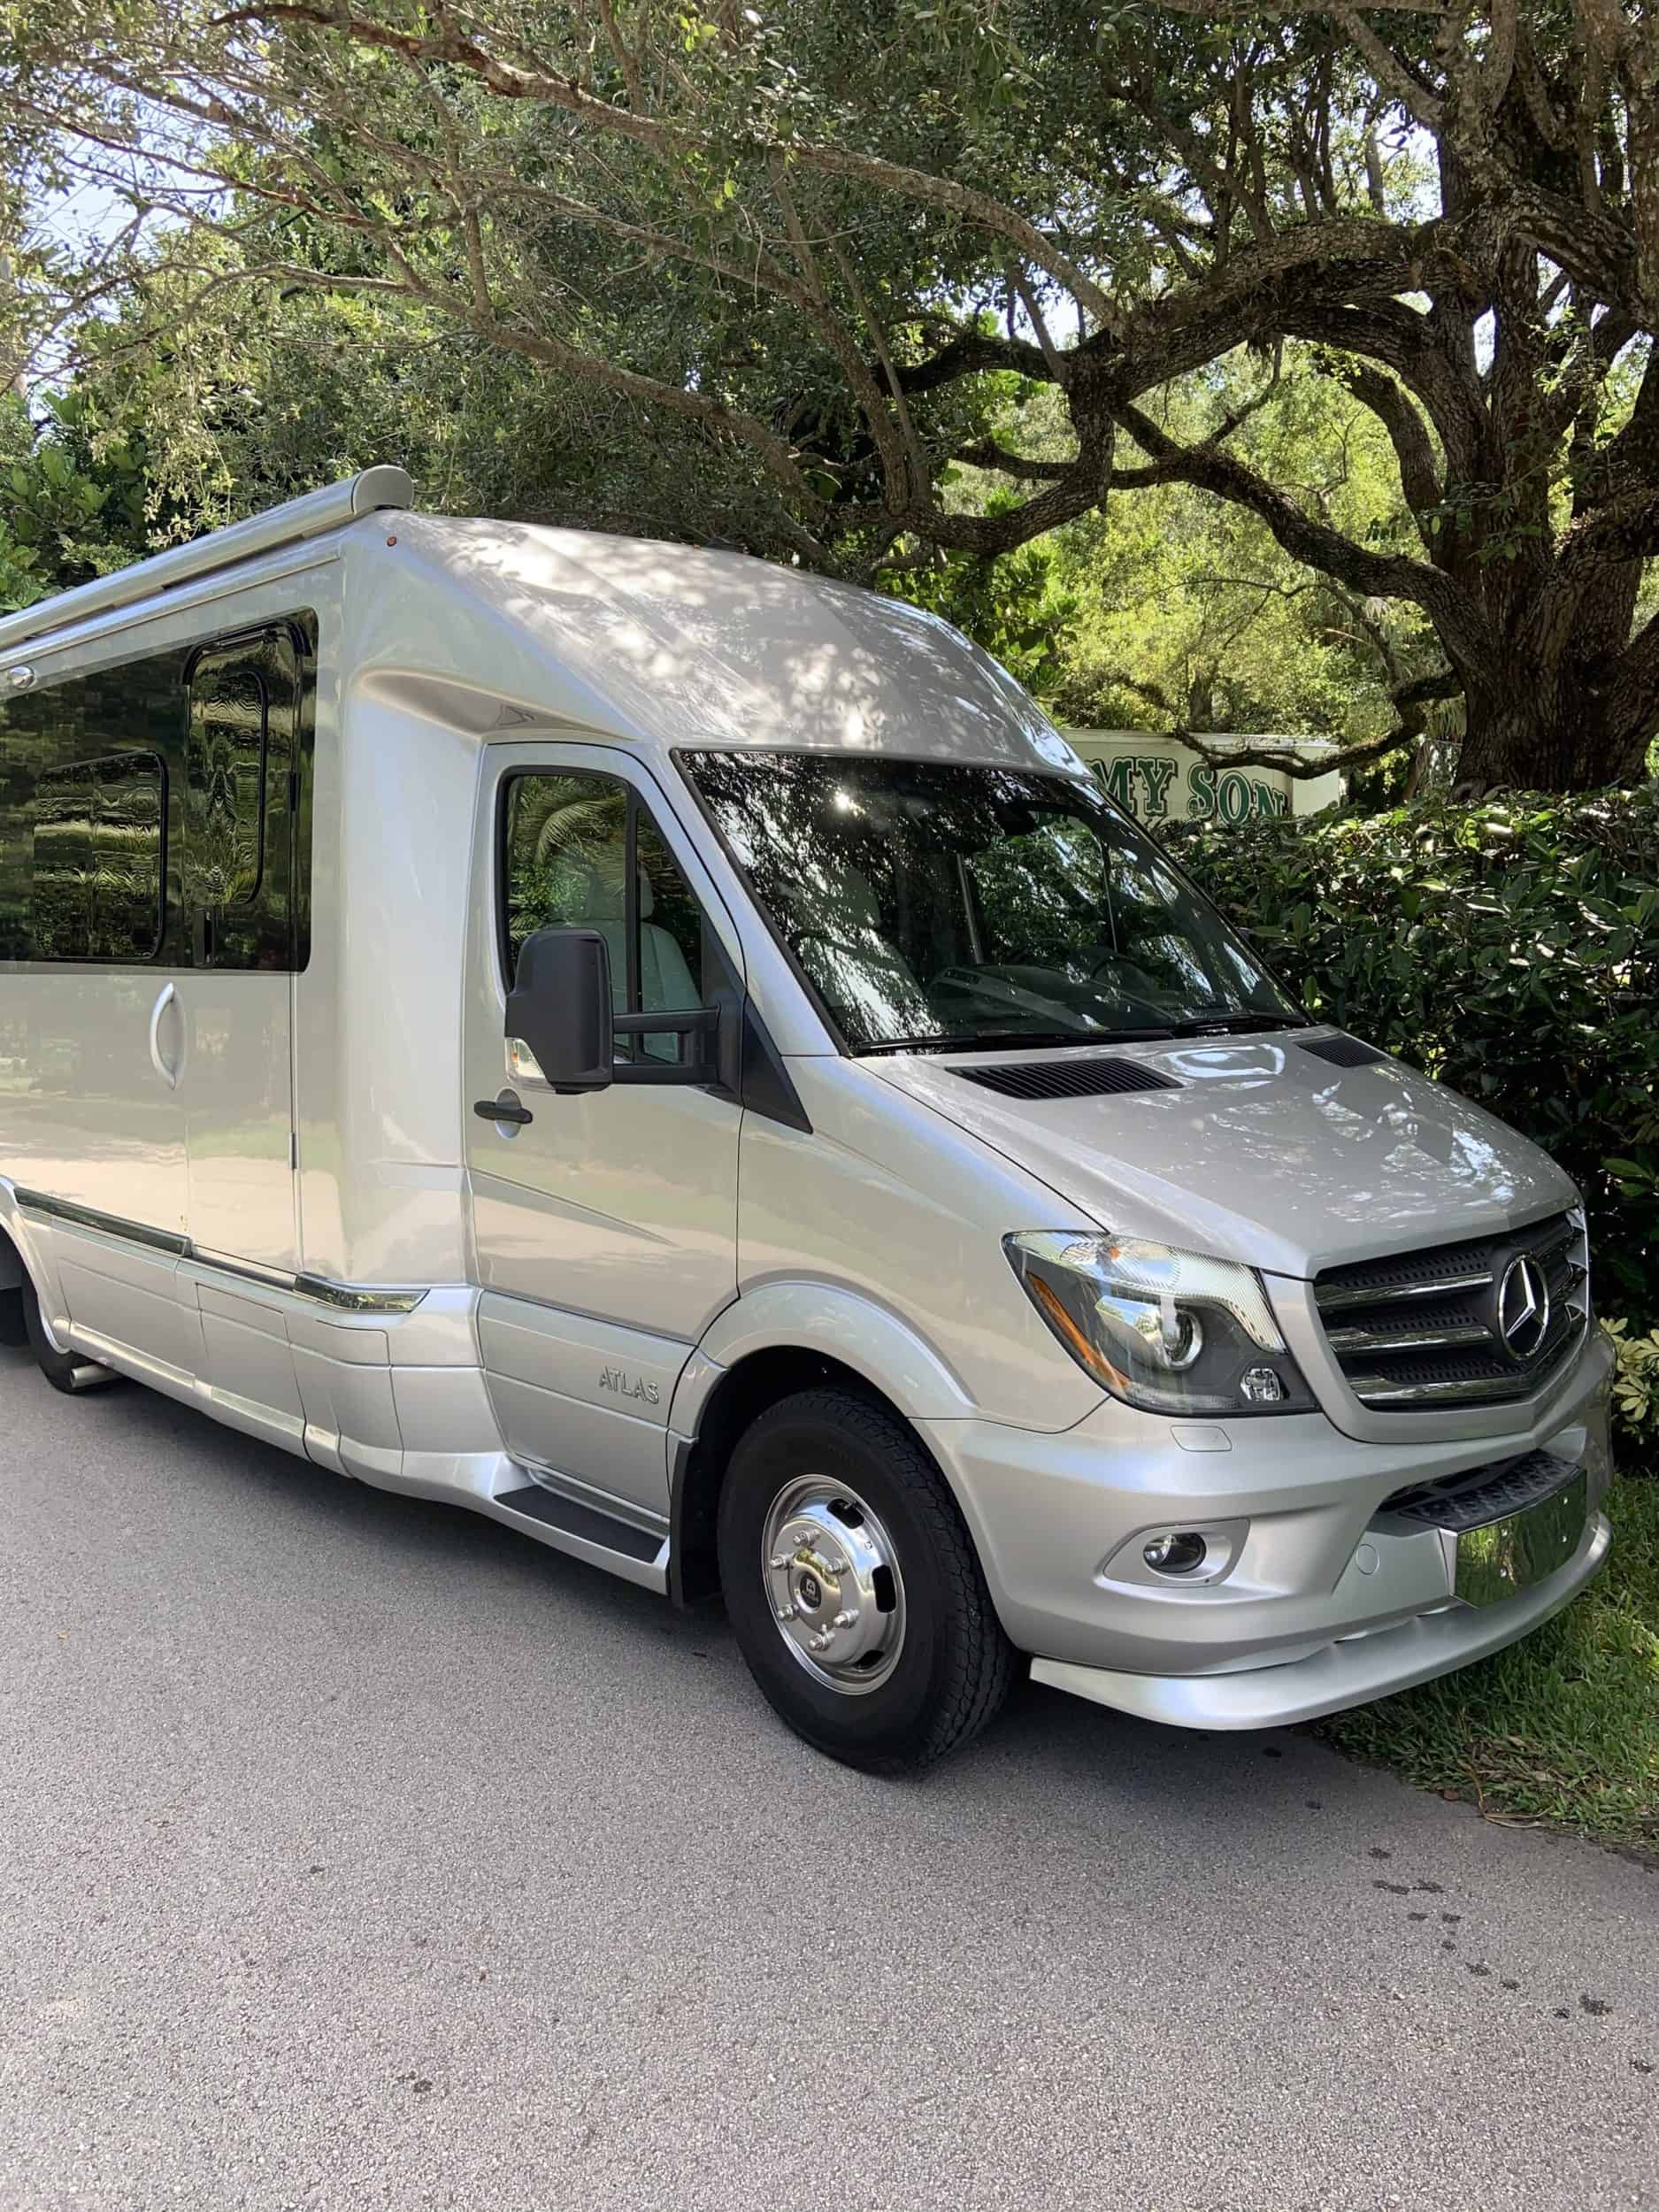 2019 Airstream 25FT Atlas For Sale in Anna Maria Airstream Marketplace